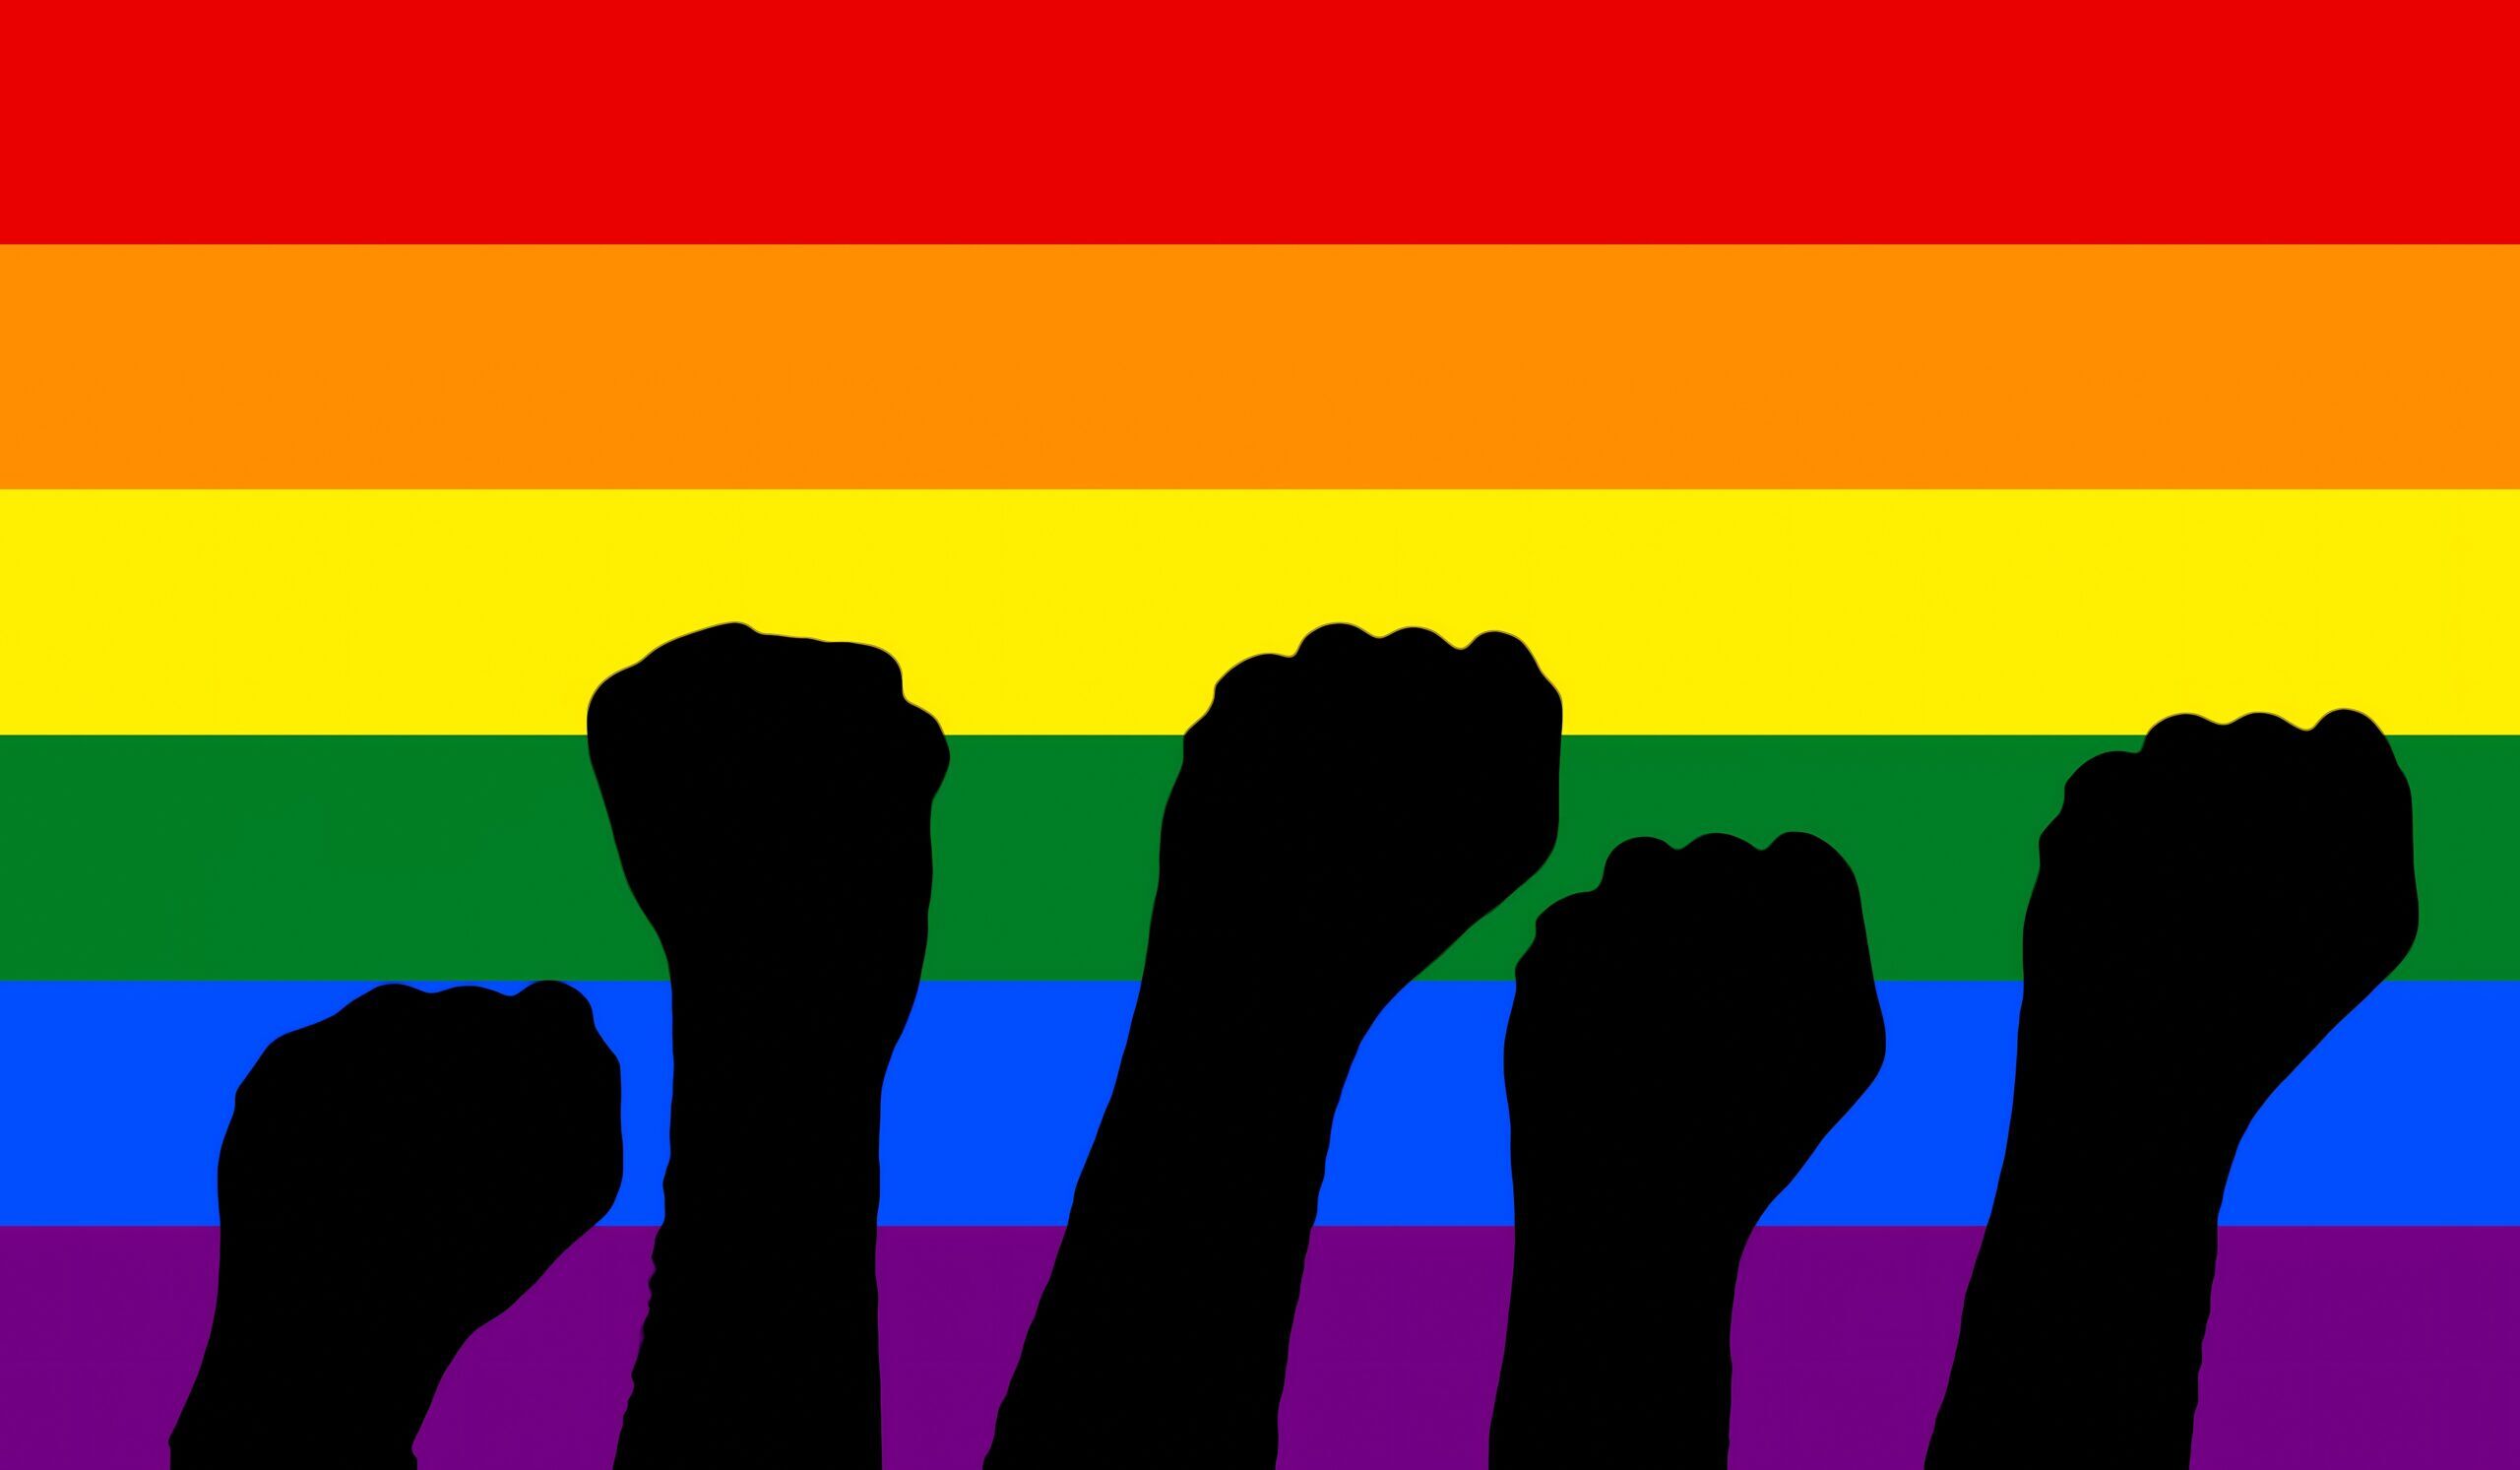 Fists raising (as dark silhouettes) over a rainbow LGBT flag. Symbols of protests and pride.